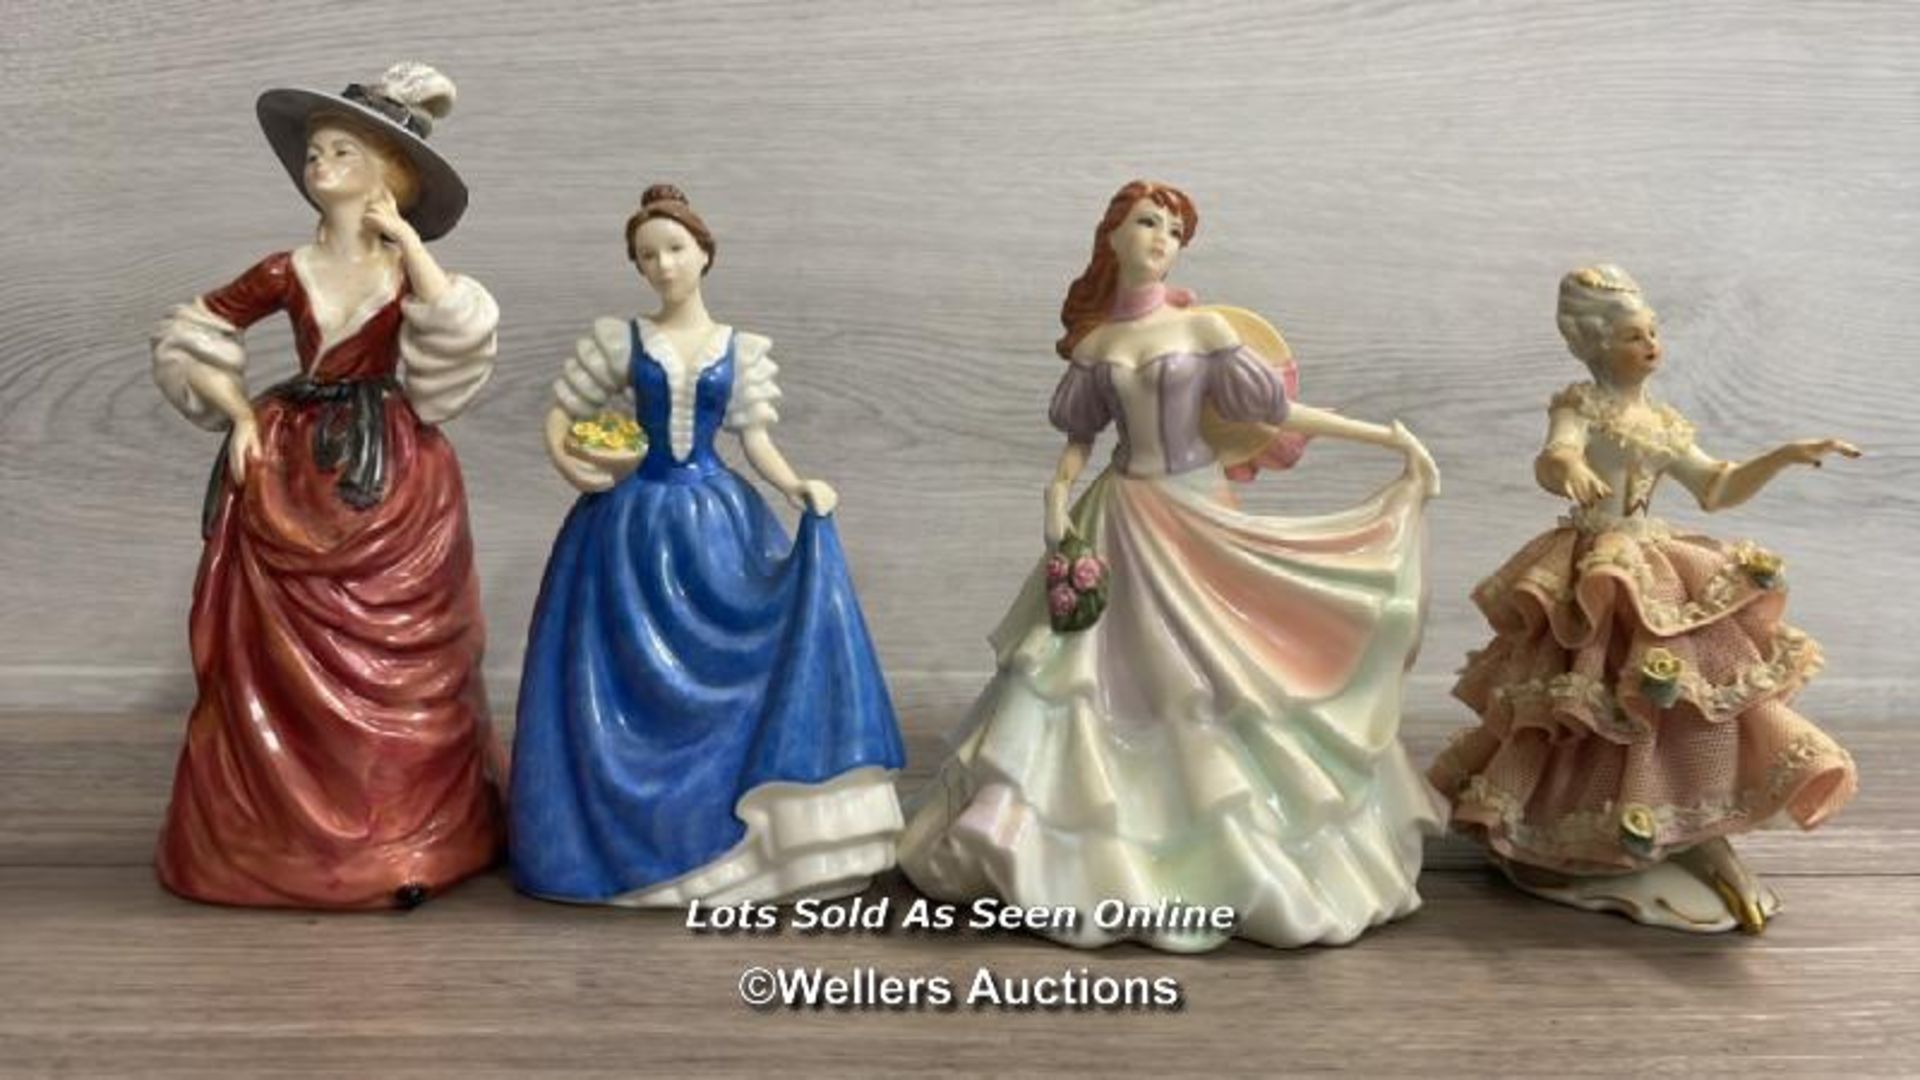 FOUR ASSORTED FIGURINES INCLUDING ROYAL DOULTON, COALPORT, FRANCESCA ART AND A DRESDEN LACE